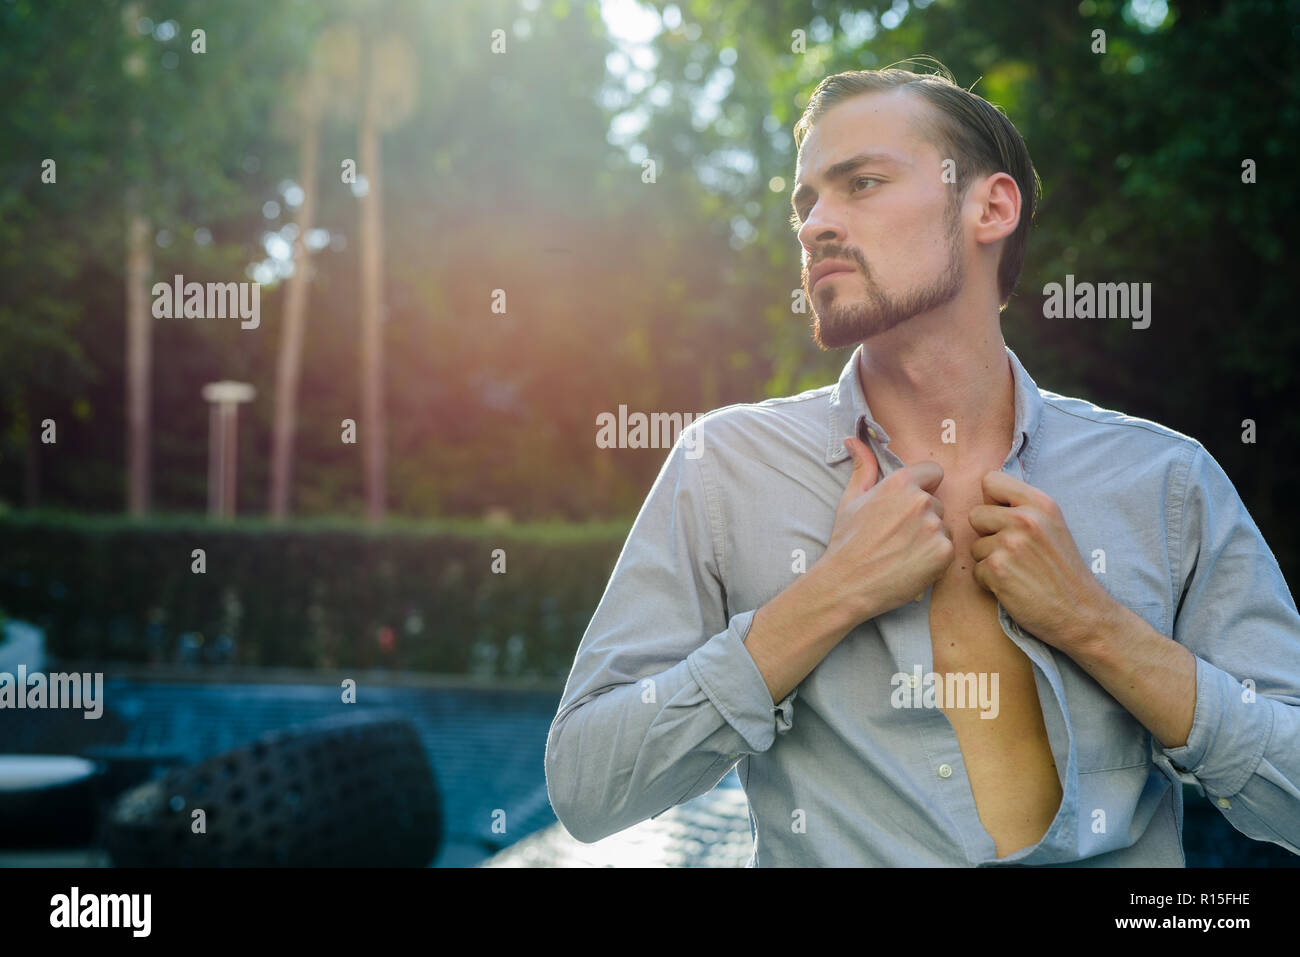 Portrait of young bearded fashionable man outdoors with lens flare Stock Photo